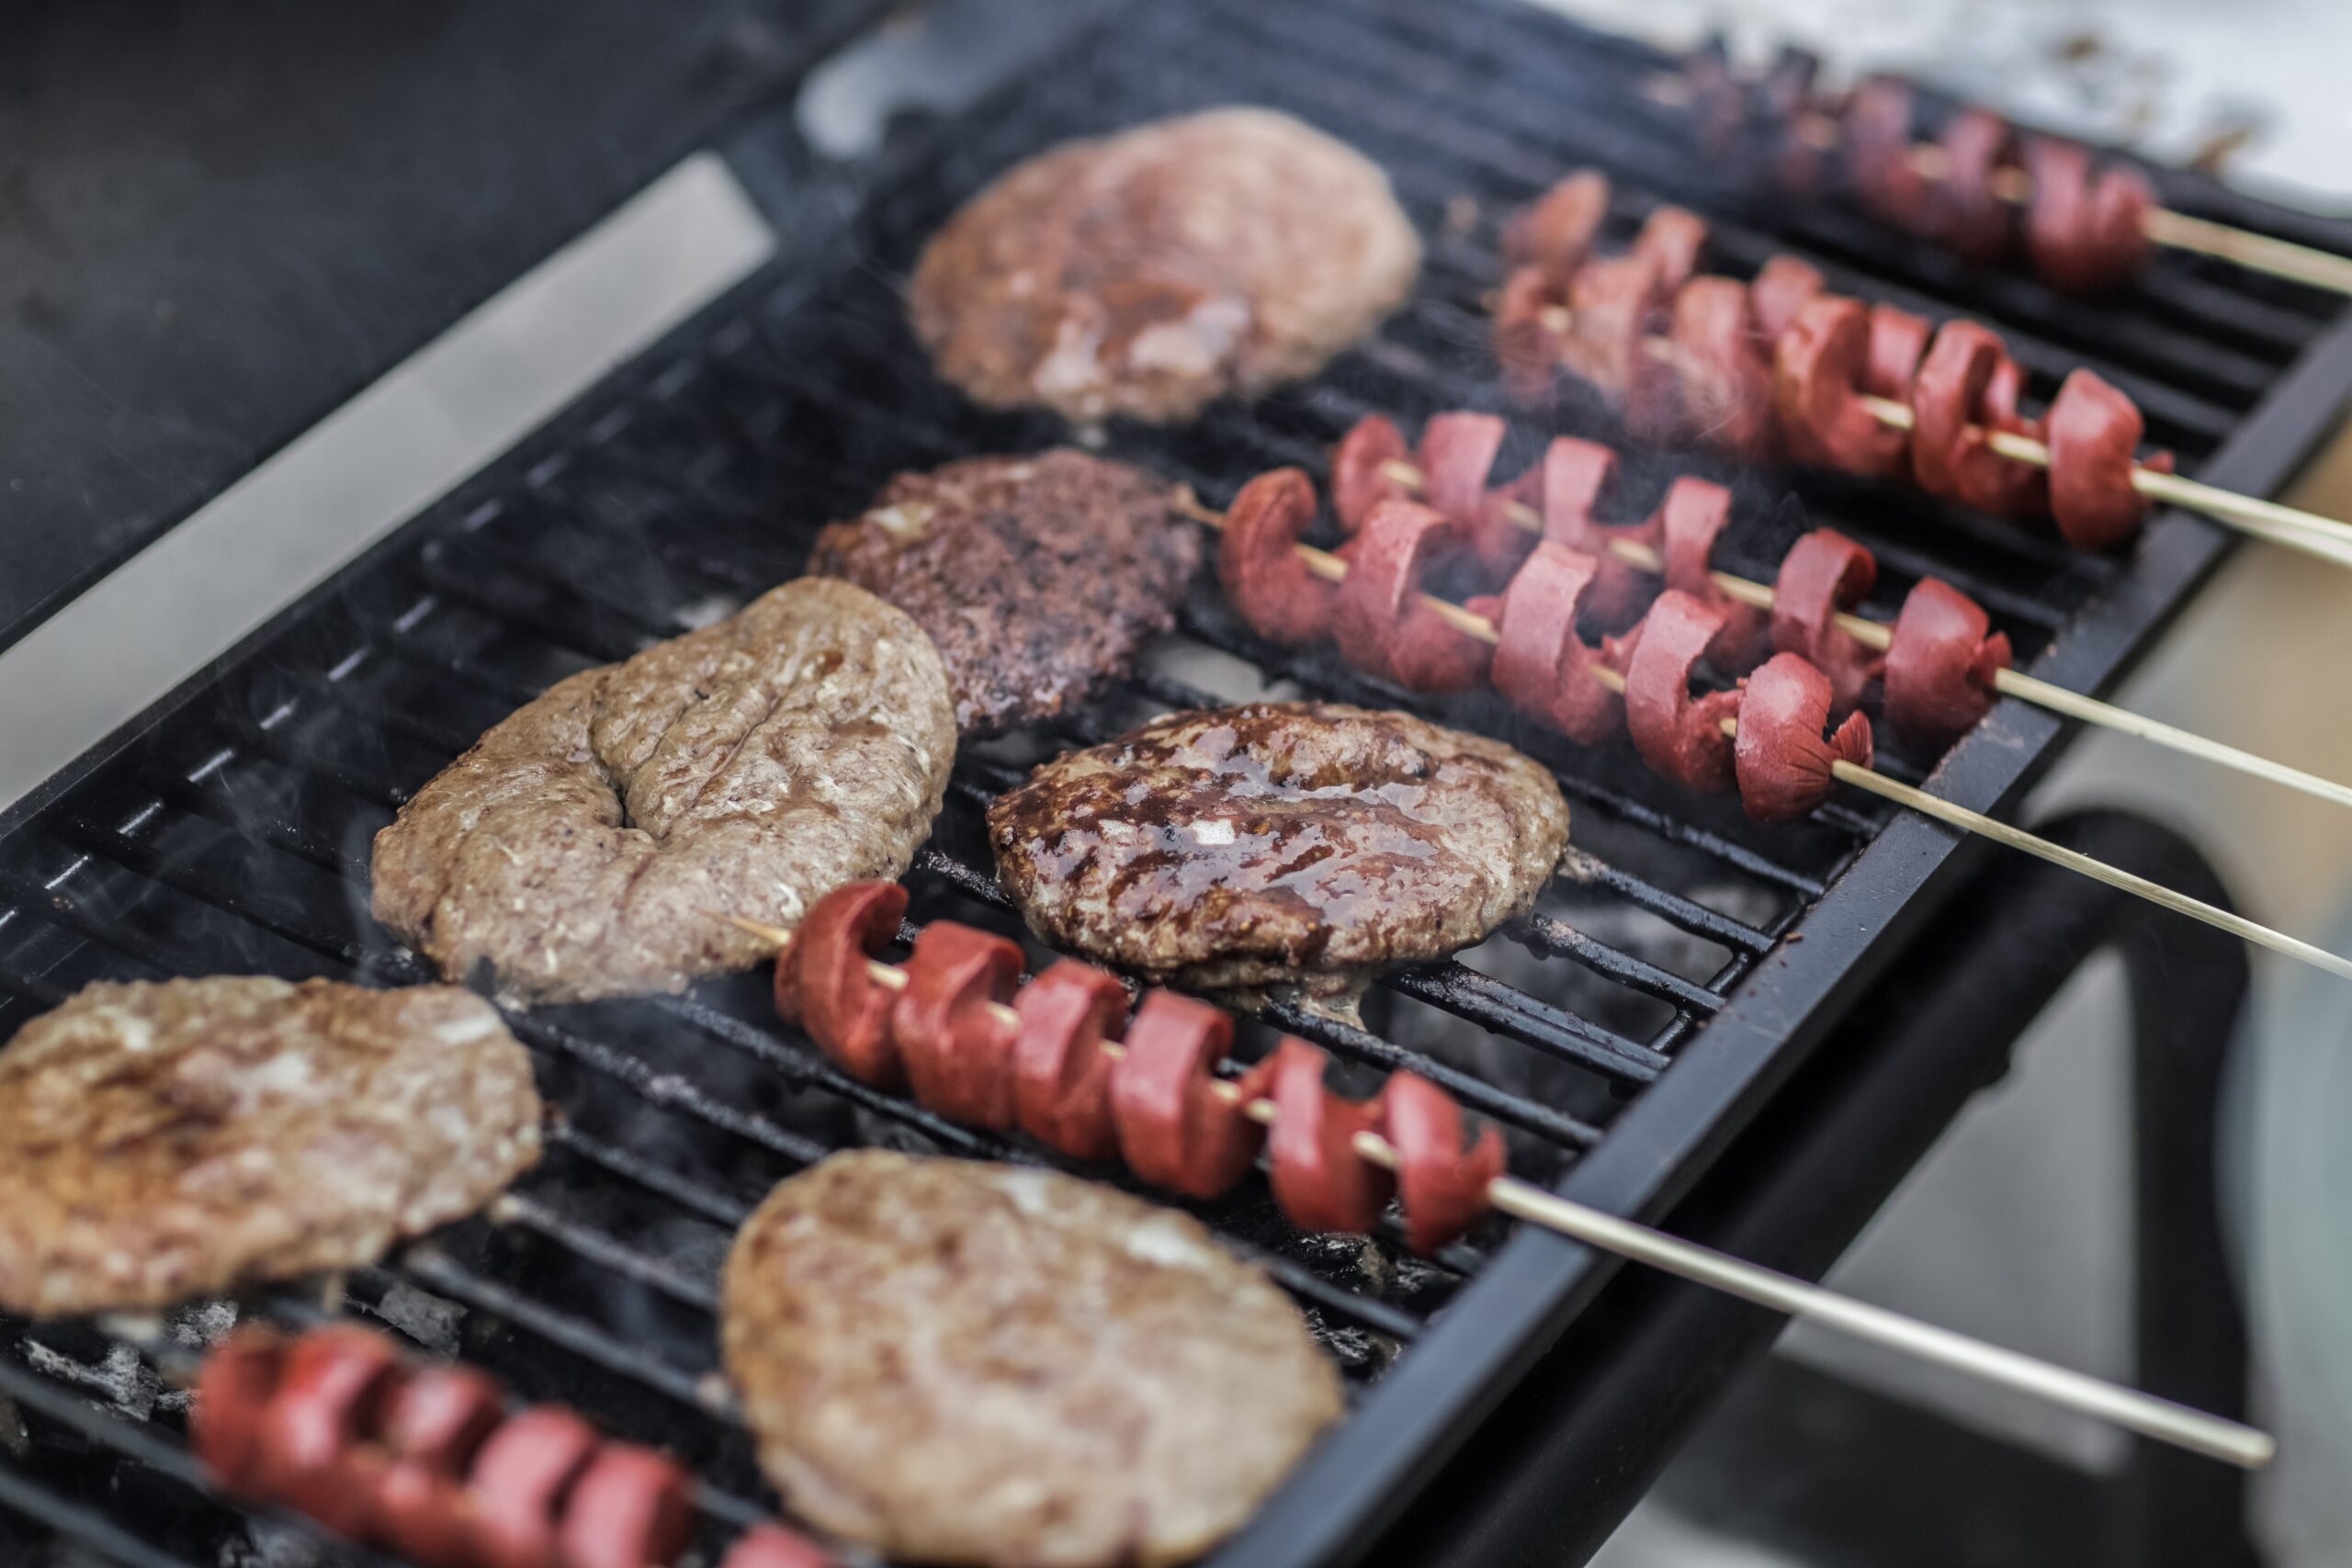 Steaks and skewered sausages on a grill image